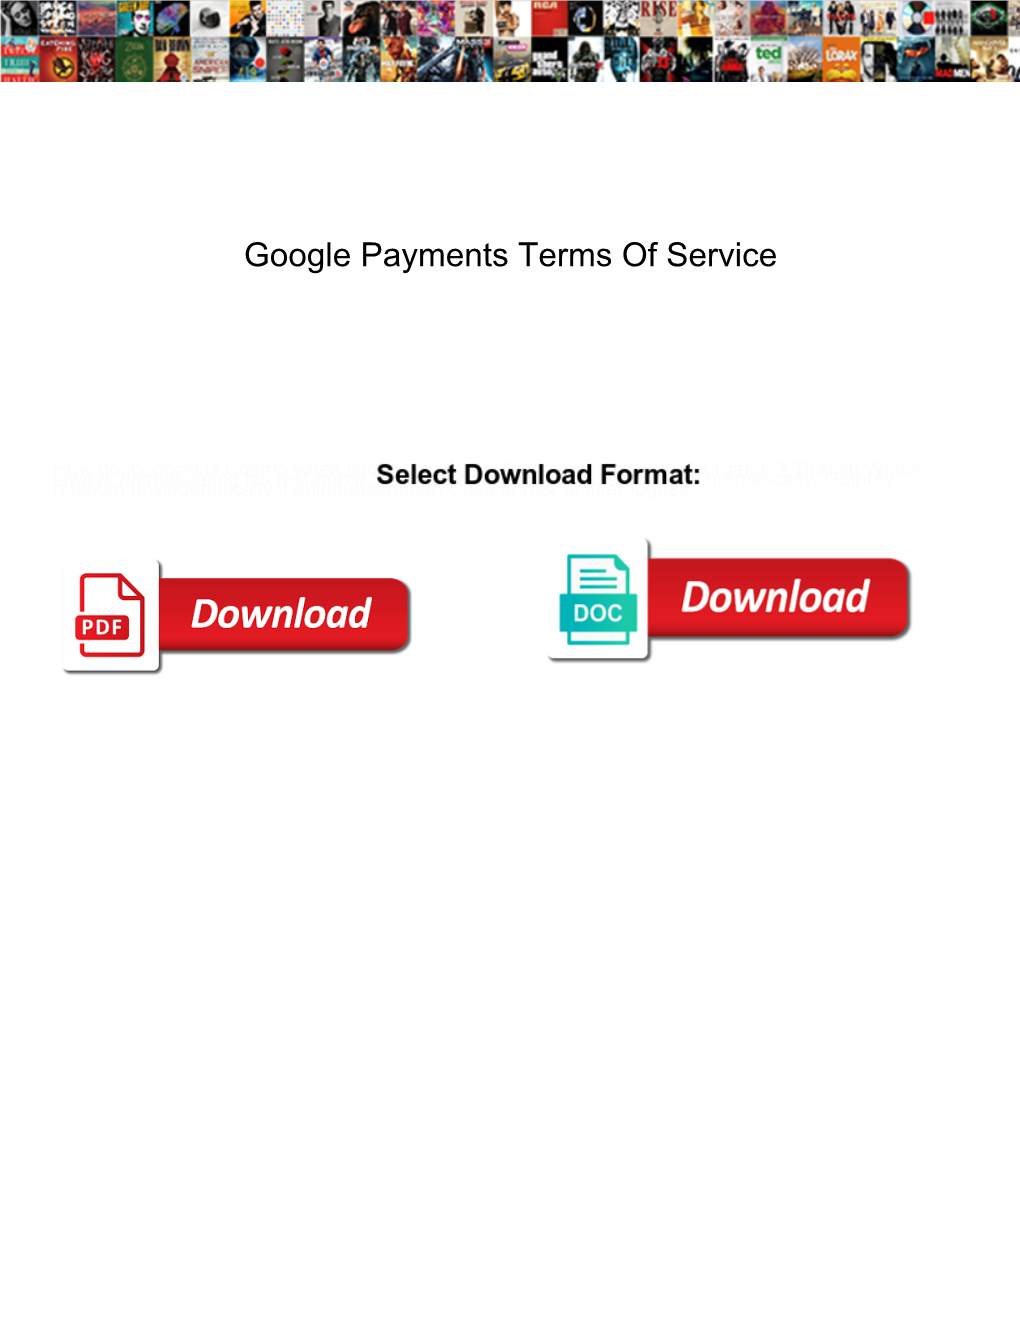 Google Payments Terms of Service